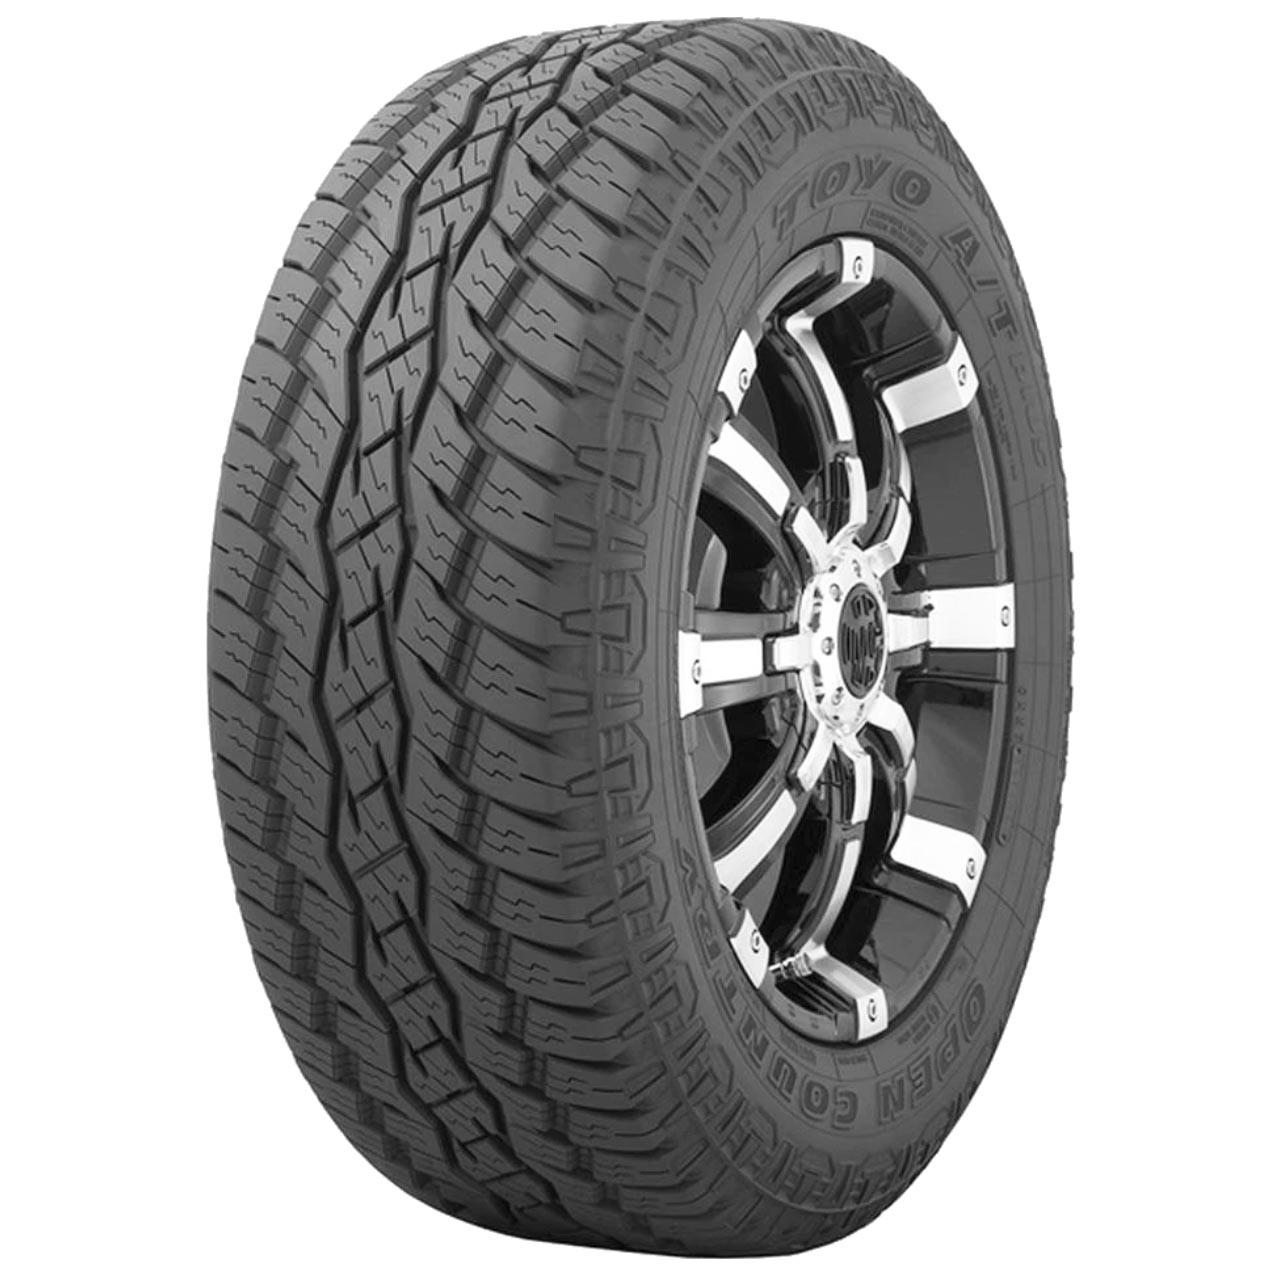 Toyo Open Country AT Plus 235/75R15 109T XL